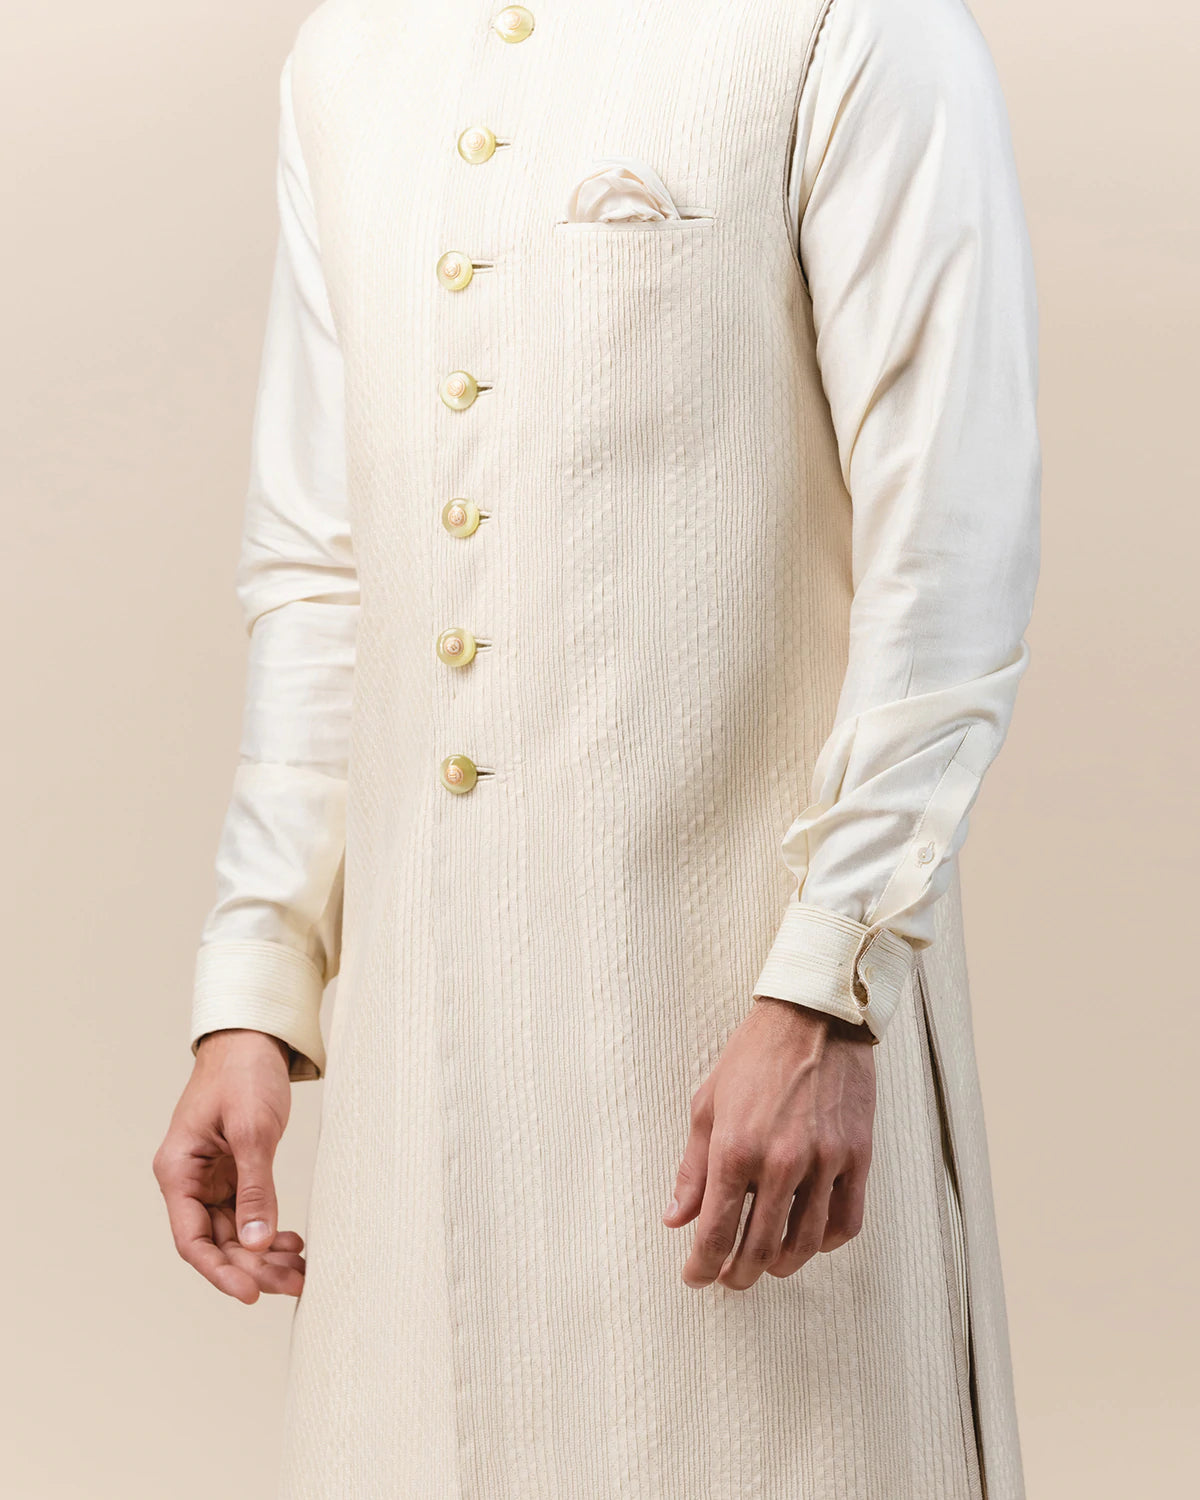 Pale Yellow Sherwani Set Indian Clothing in Denver, CO, Aurora, CO, Boulder, CO, Fort Collins, CO, Colorado Springs, CO, Parker, CO, Highlands Ranch, CO, Cherry Creek, CO, Centennial, CO, and Longmont, CO. NATIONWIDE SHIPPING USA- India Fashion X